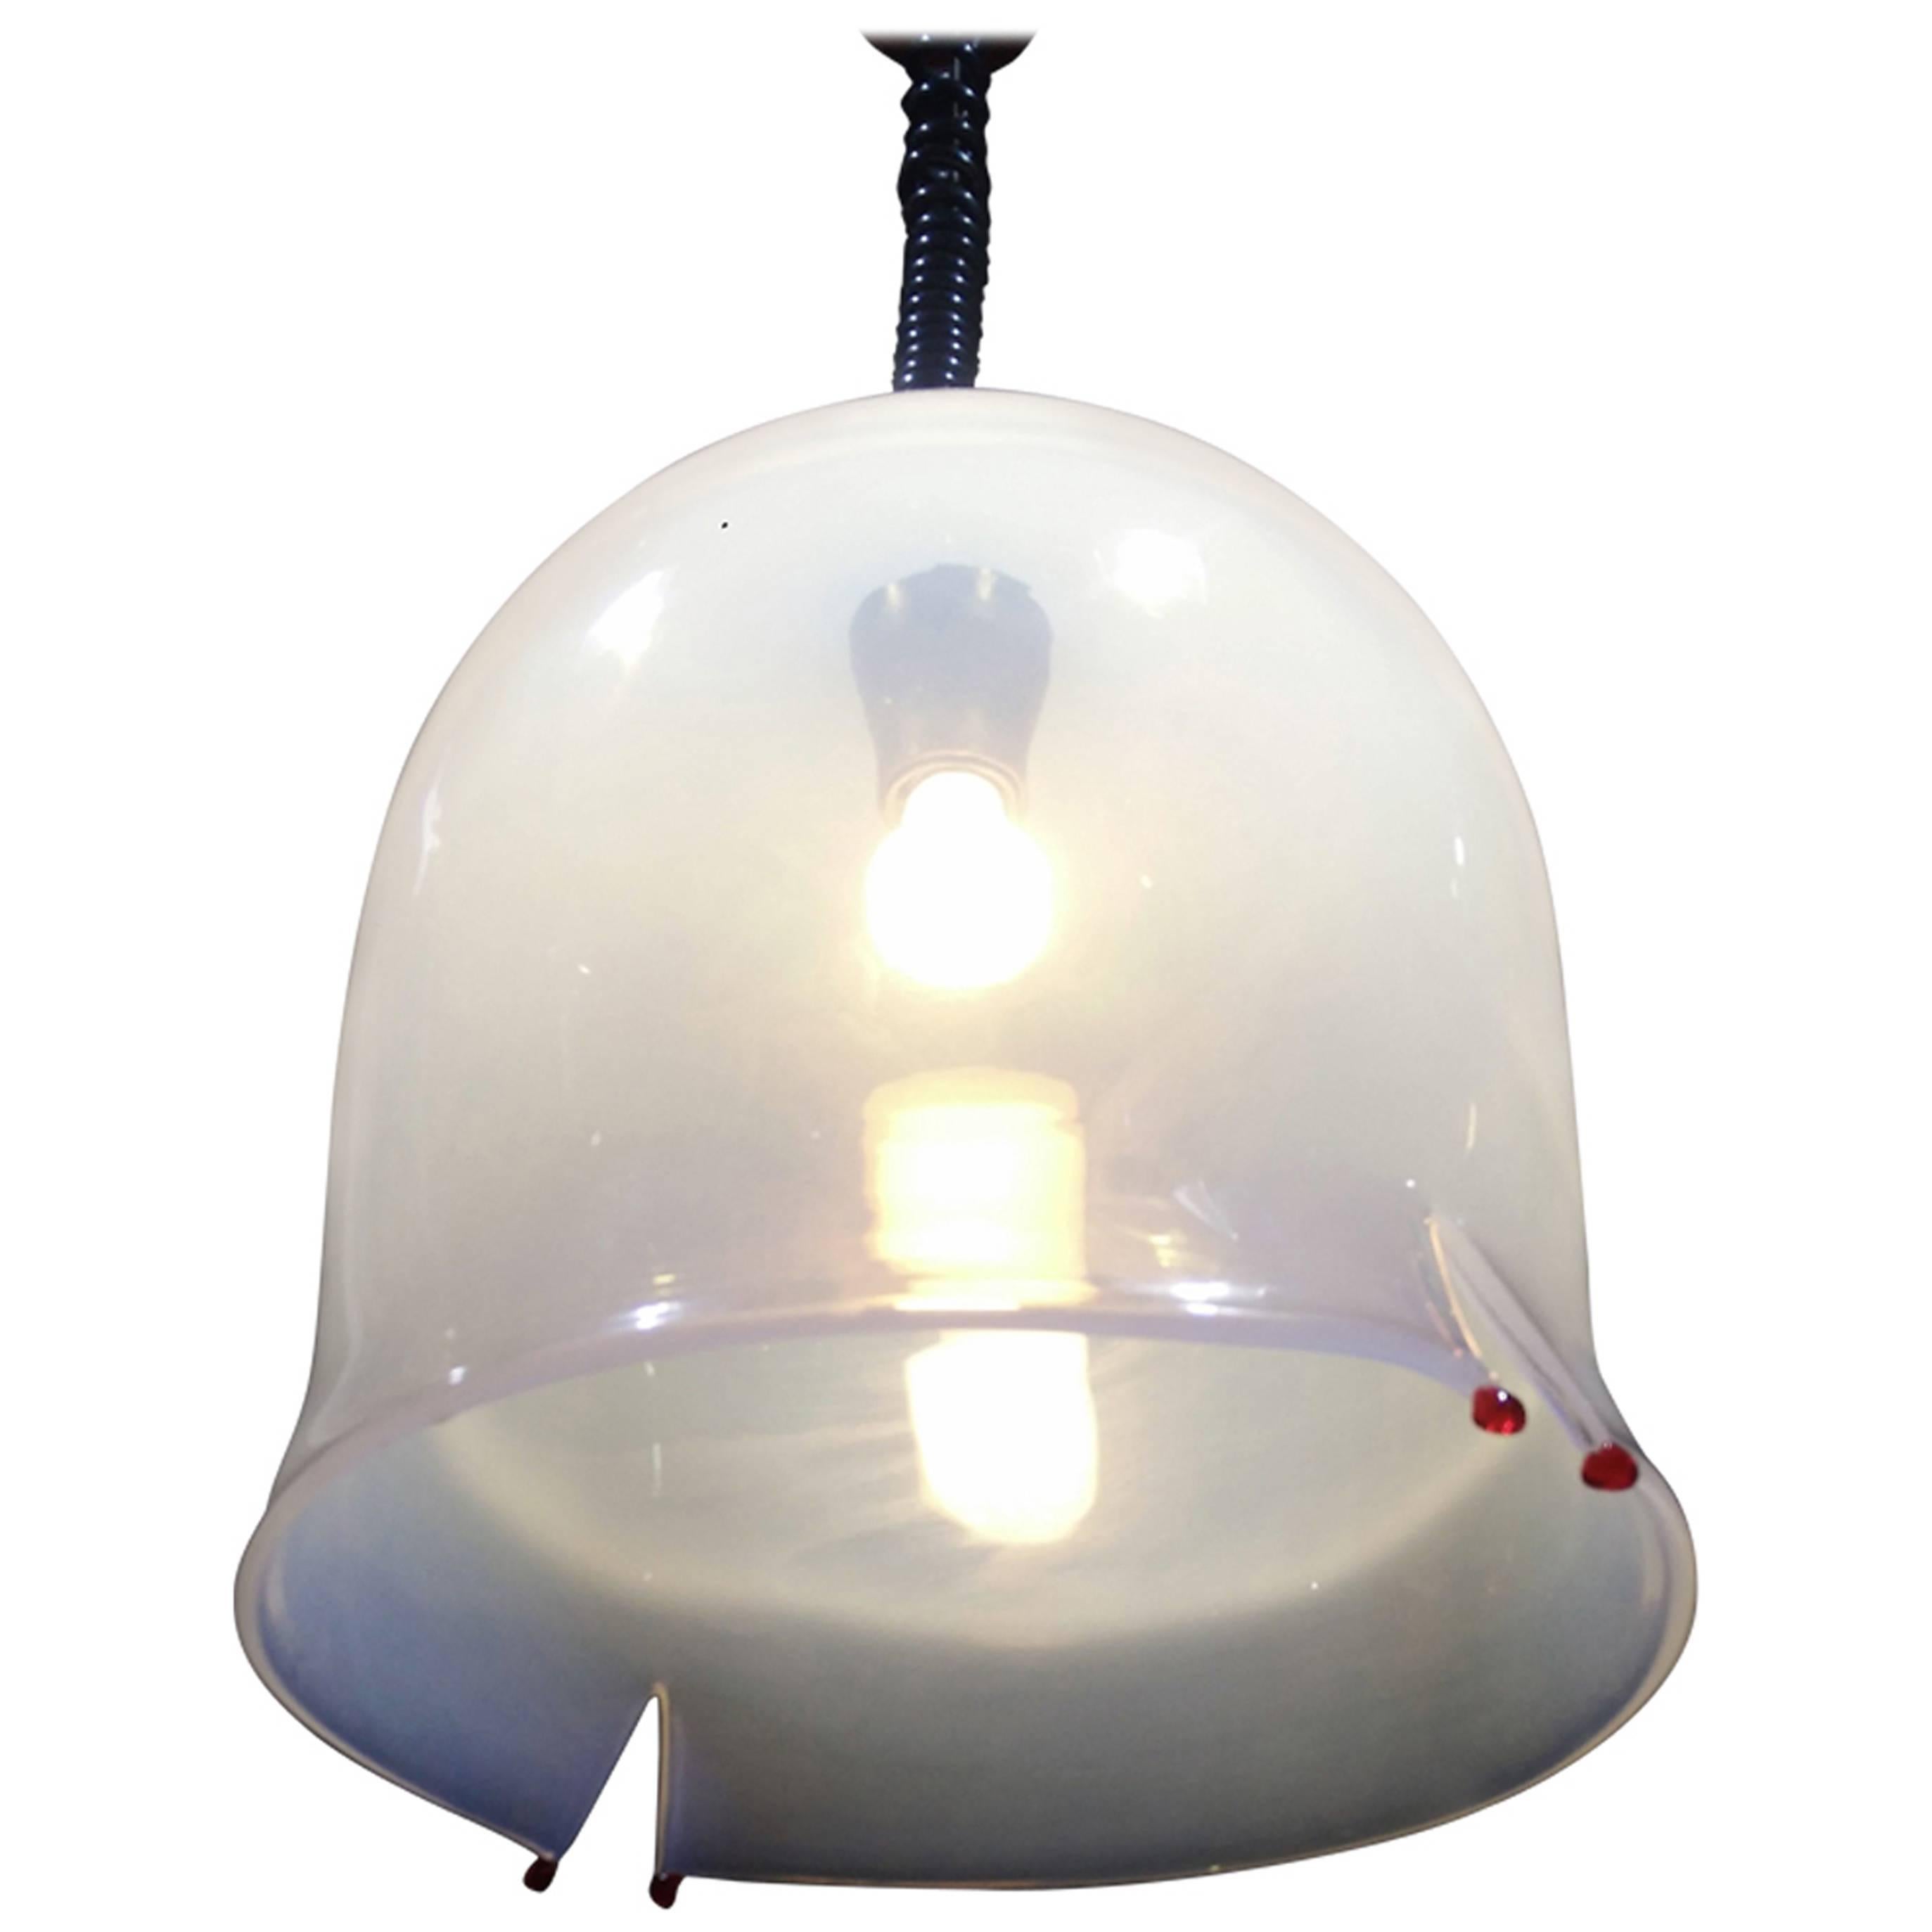 Six Mid-Century Modern Bell Pendant Light by Leucos 1960 by Toso and Pamio